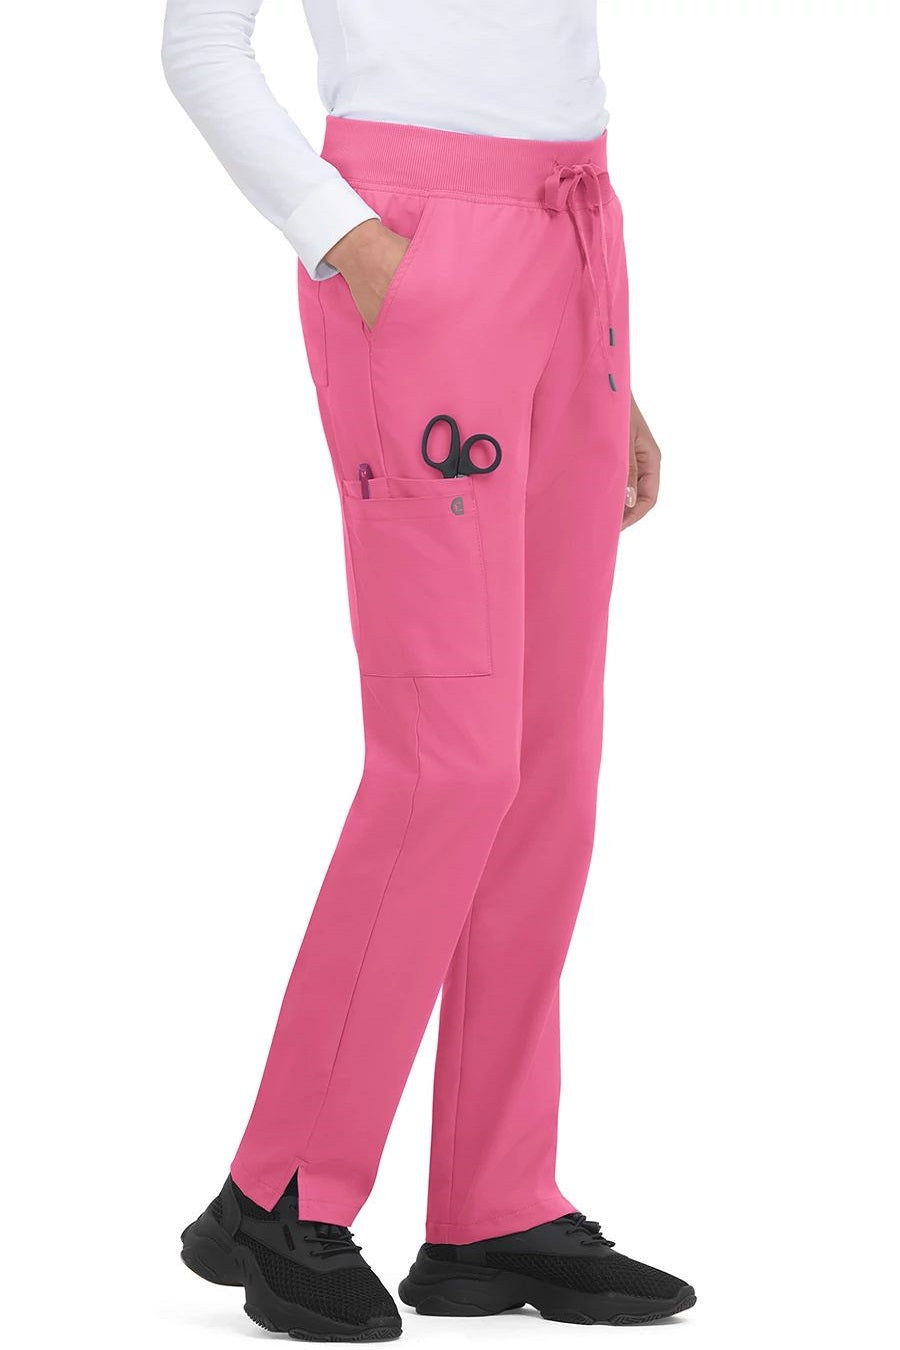 koi Scrub Pants Cureology Atria in Petite Carnation at Parker's Clothing and Shoes.